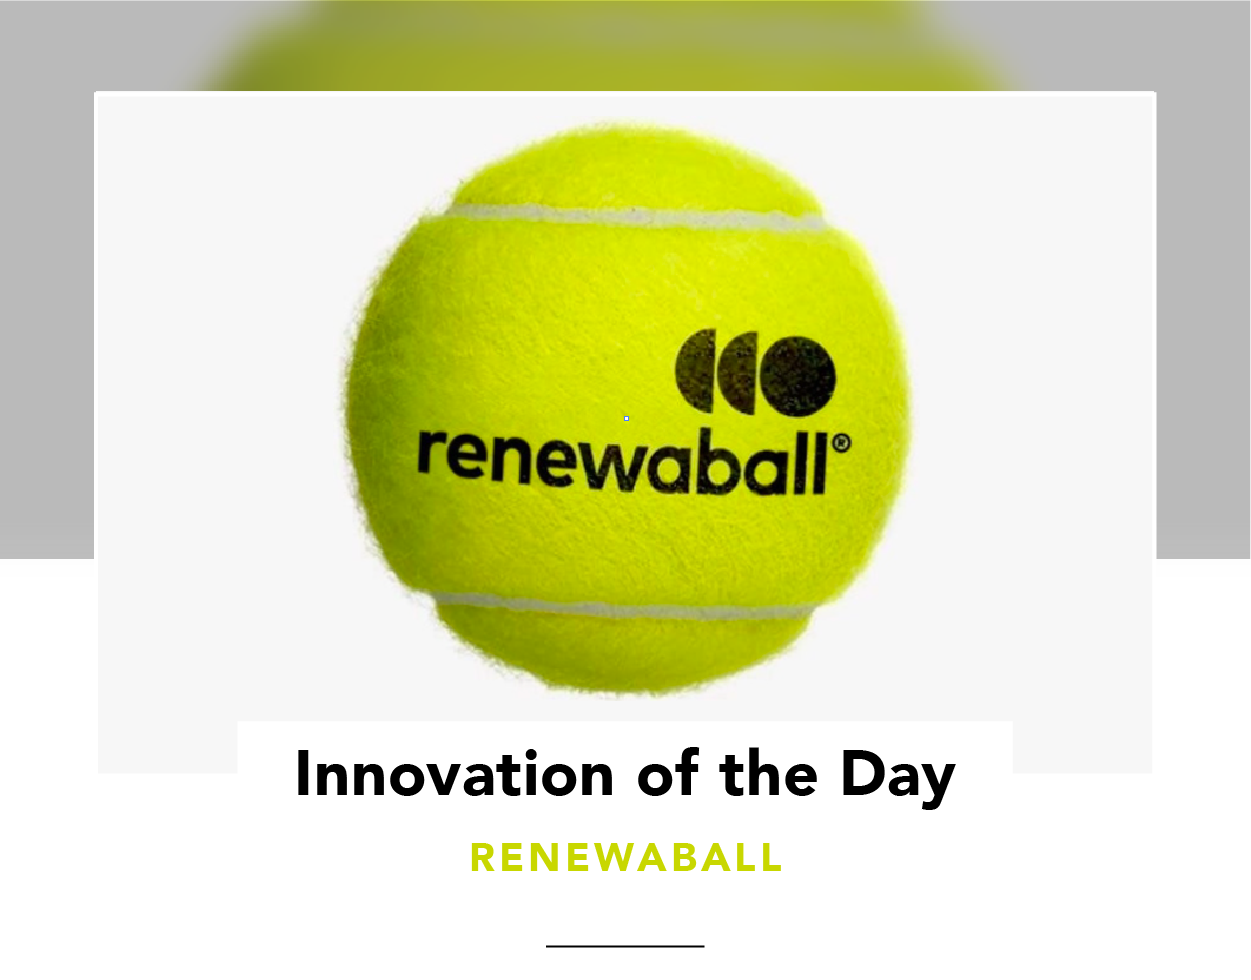 Close-up of a fluorescent yellow tennis ball with Renewaball's name and logo